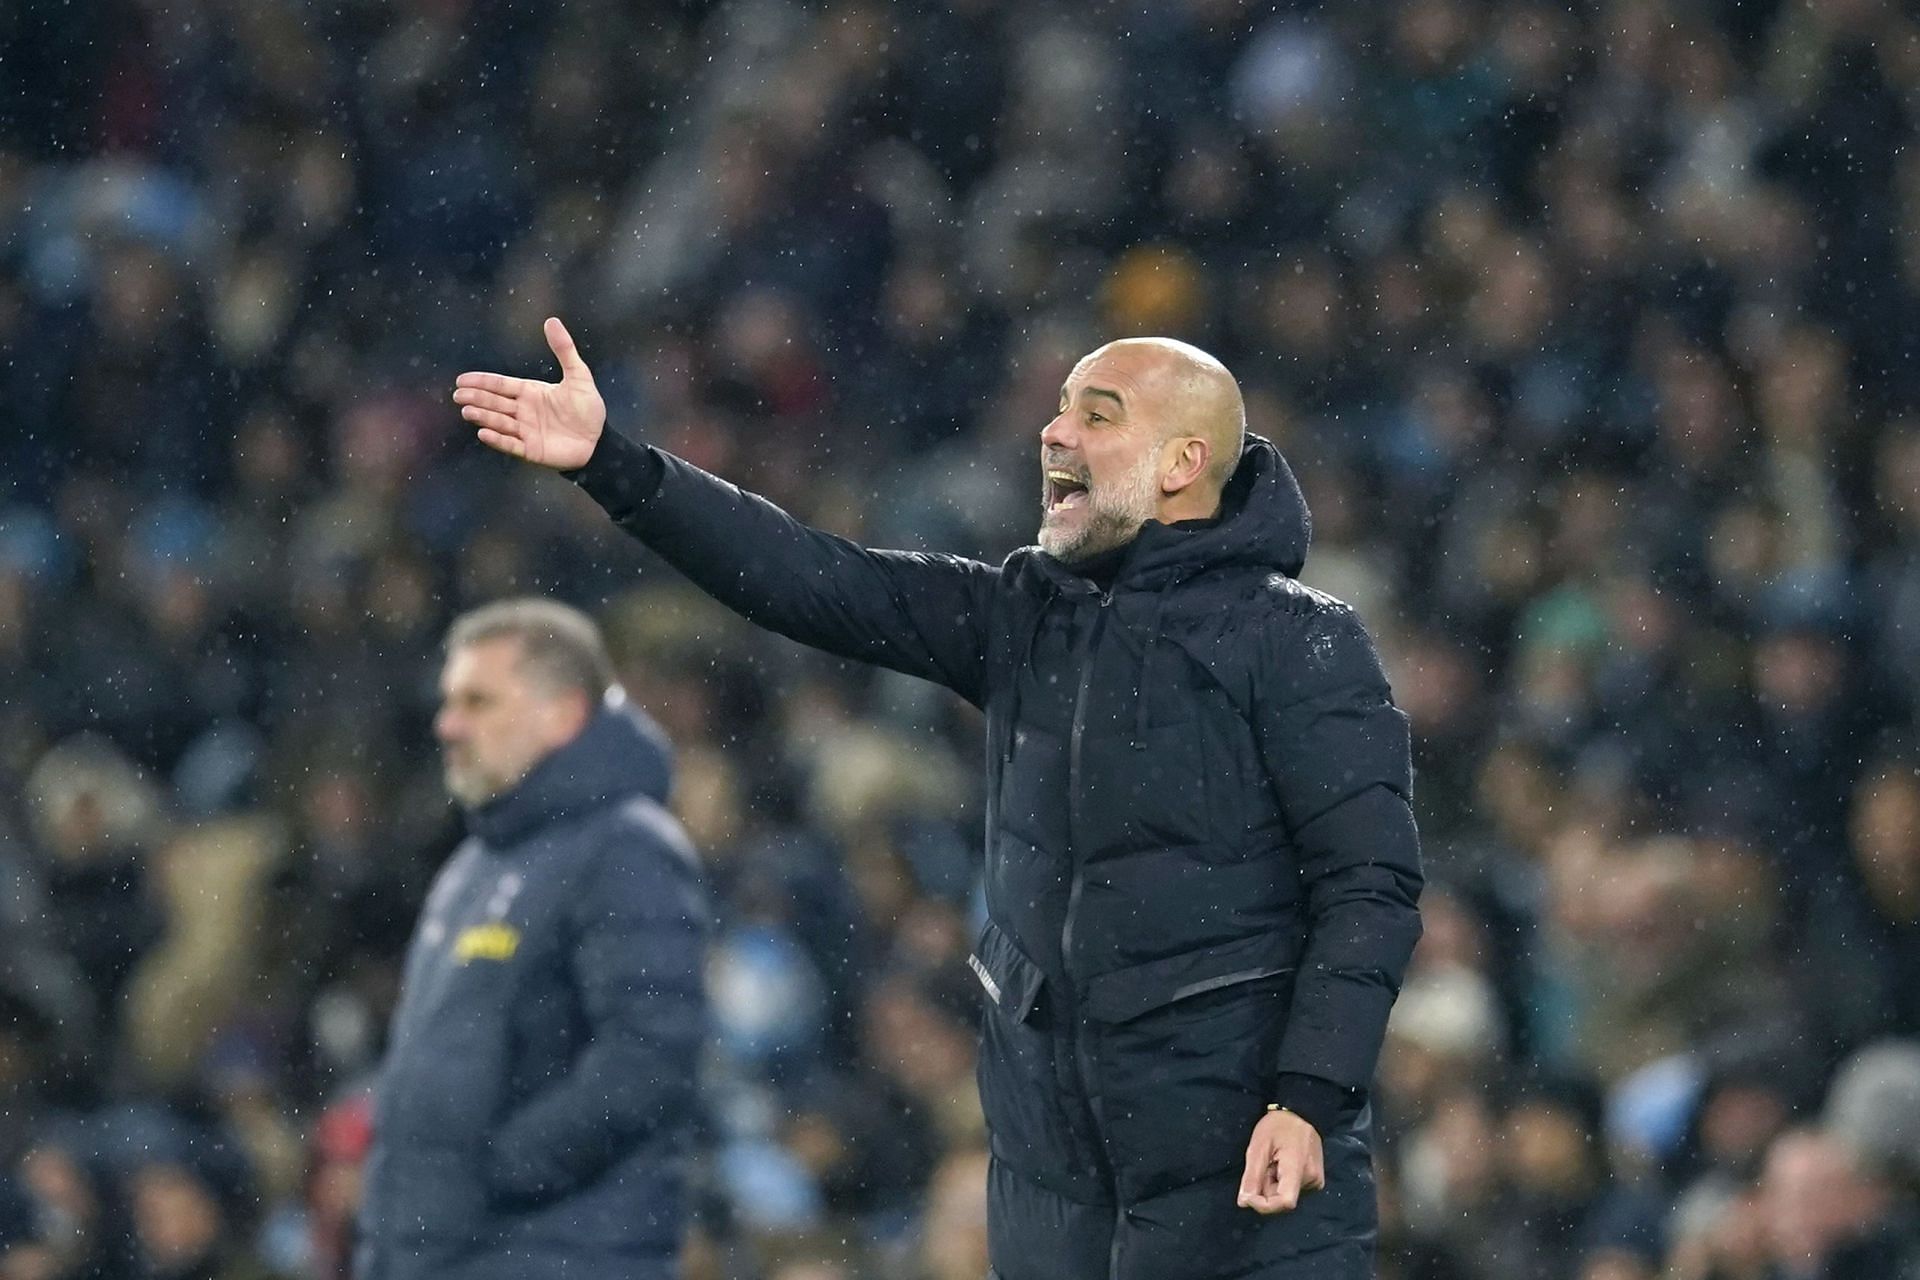 Pep Guardiola has always been a staunch believer in the 4-3-3 system.